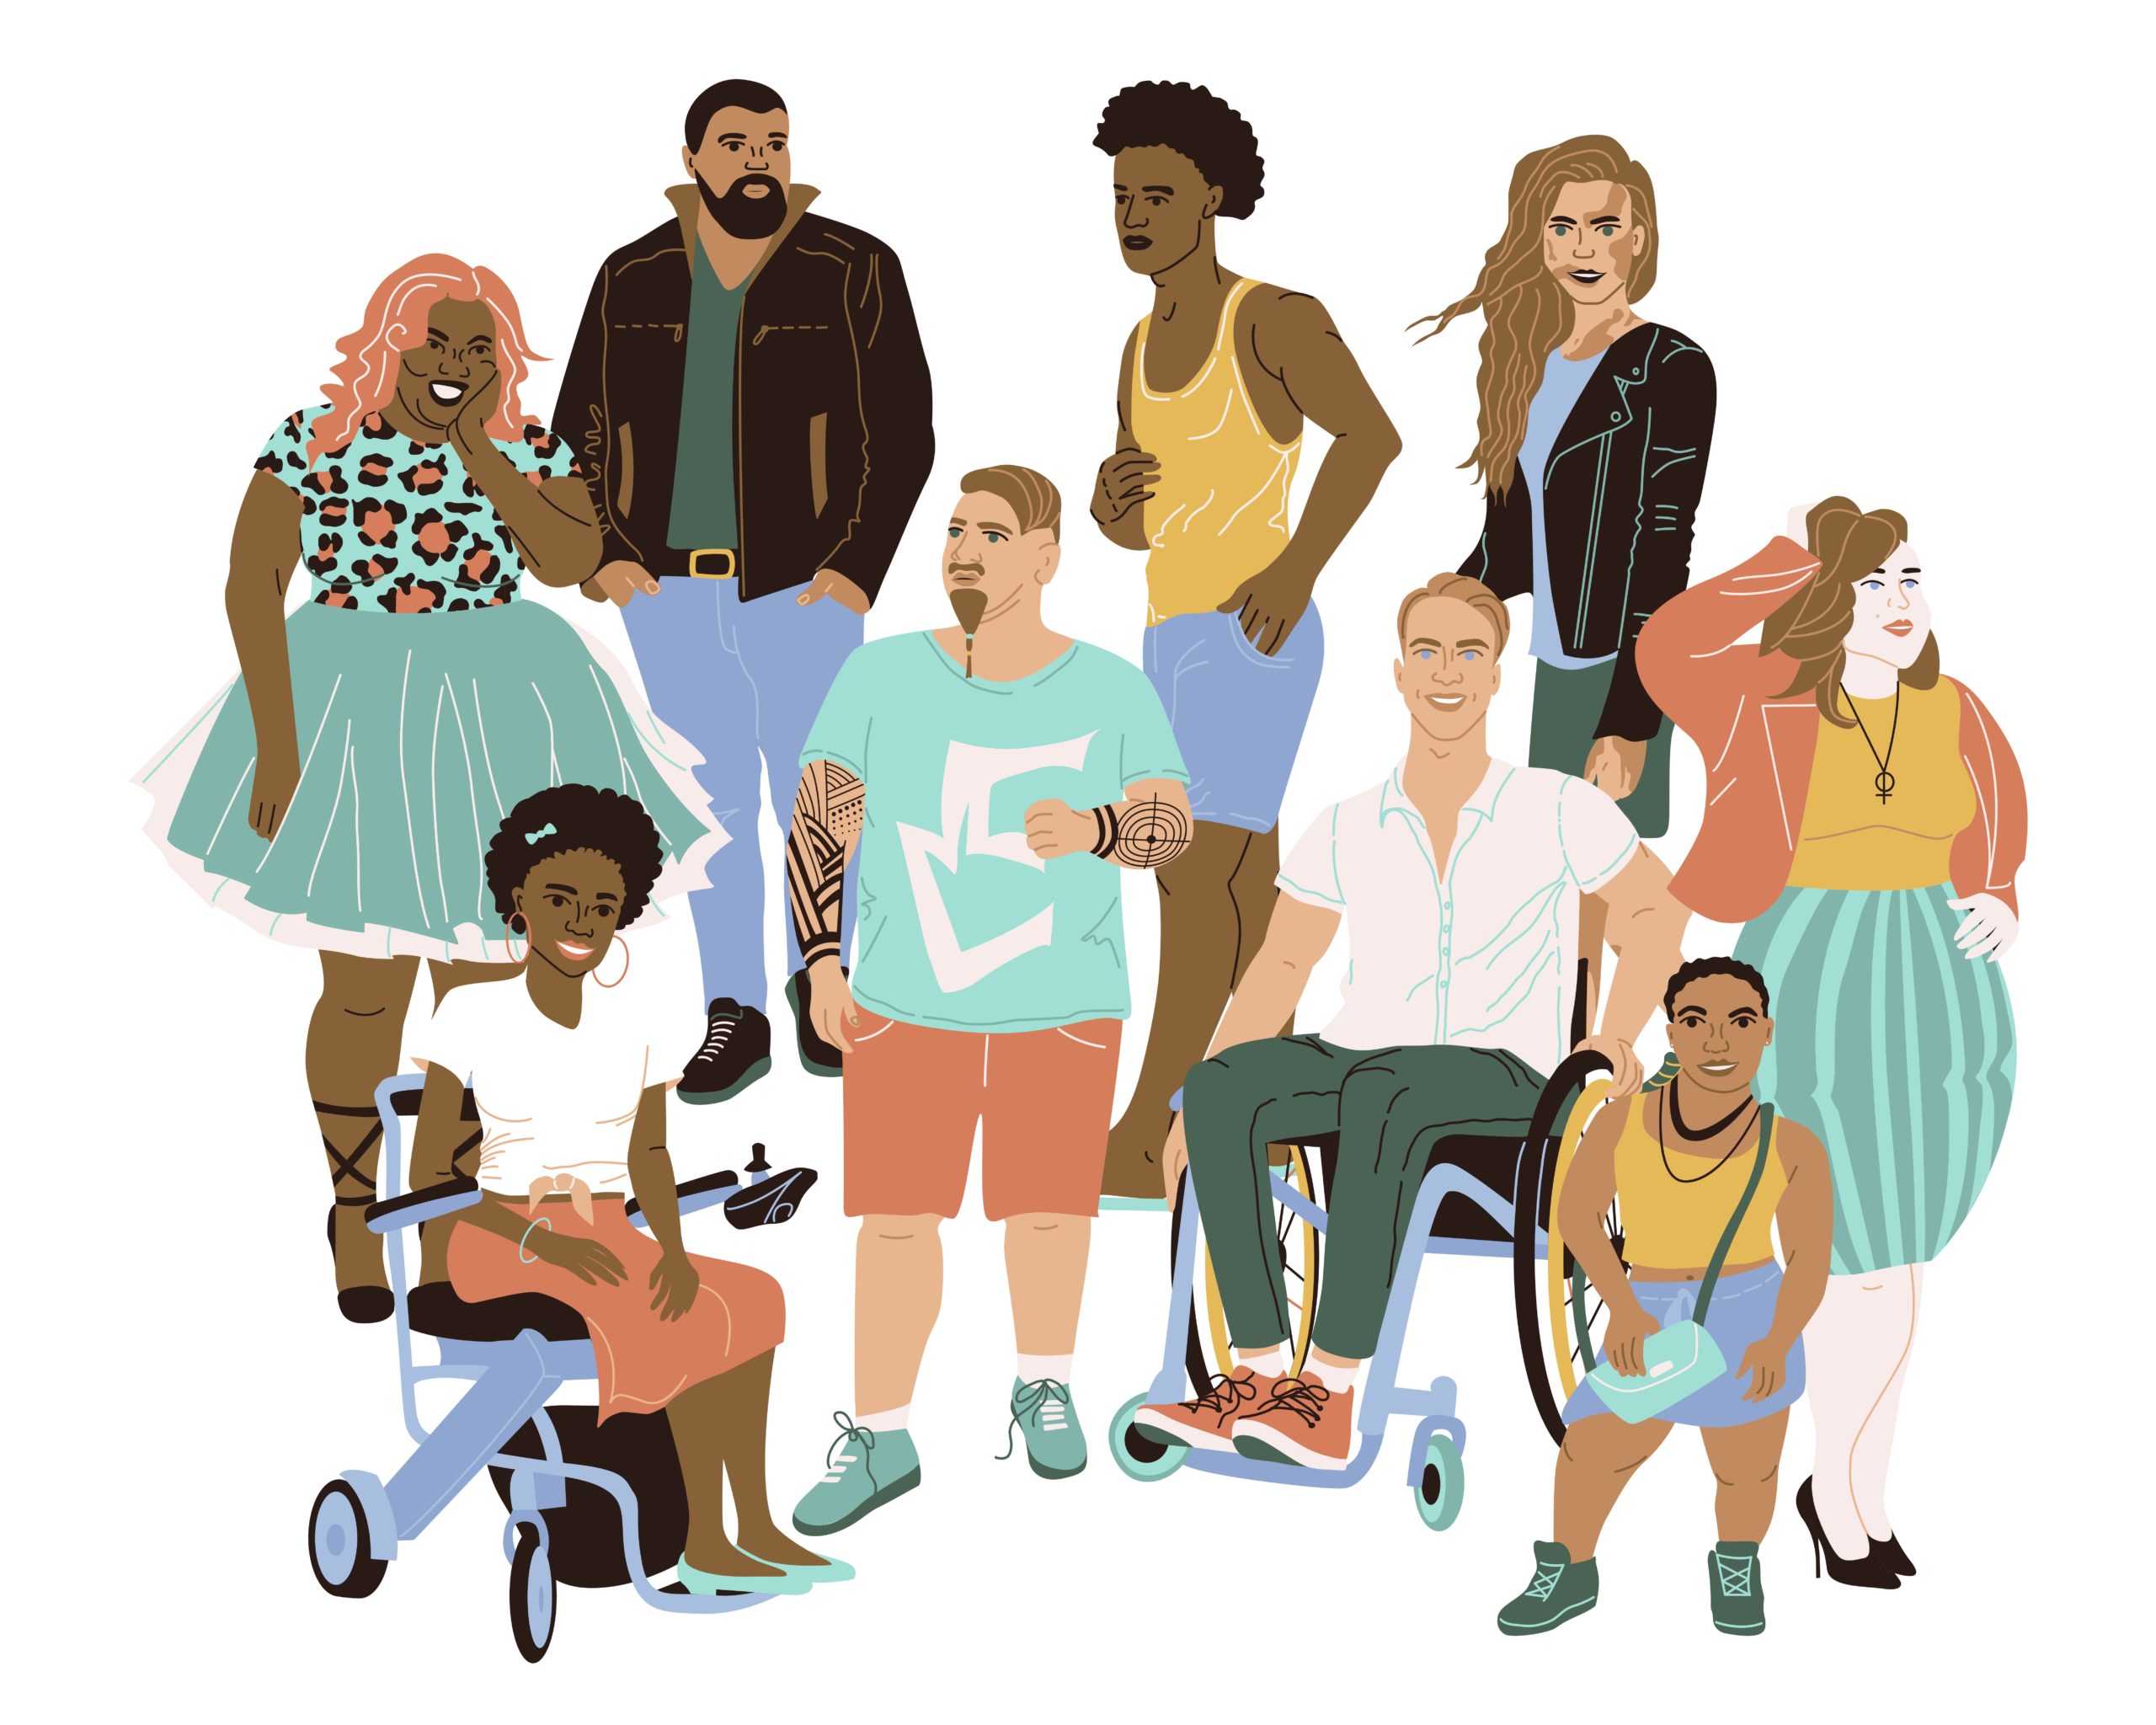 A group of diverse disabled people. Image by Sasha Matbon